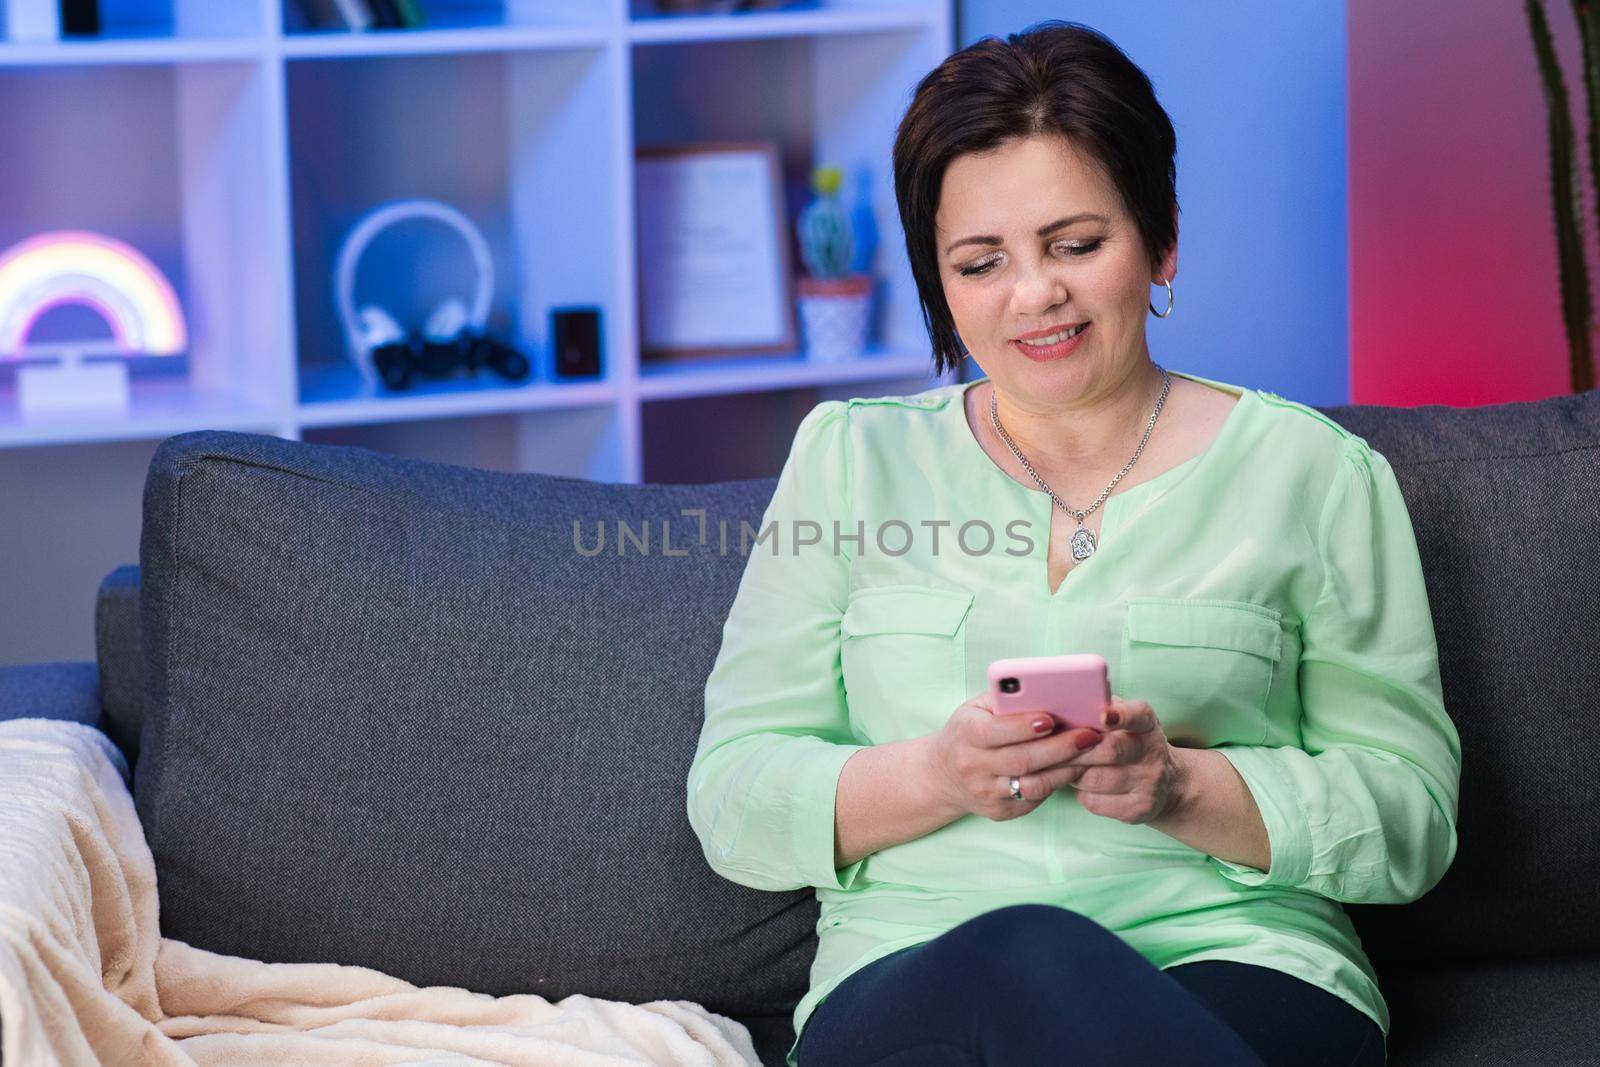 Senior Caucasian Woman with Short Black Hair Sitting on Couch at Home, Holding Invisible Smartphone in Hand and Chatting with Someone by uflypro